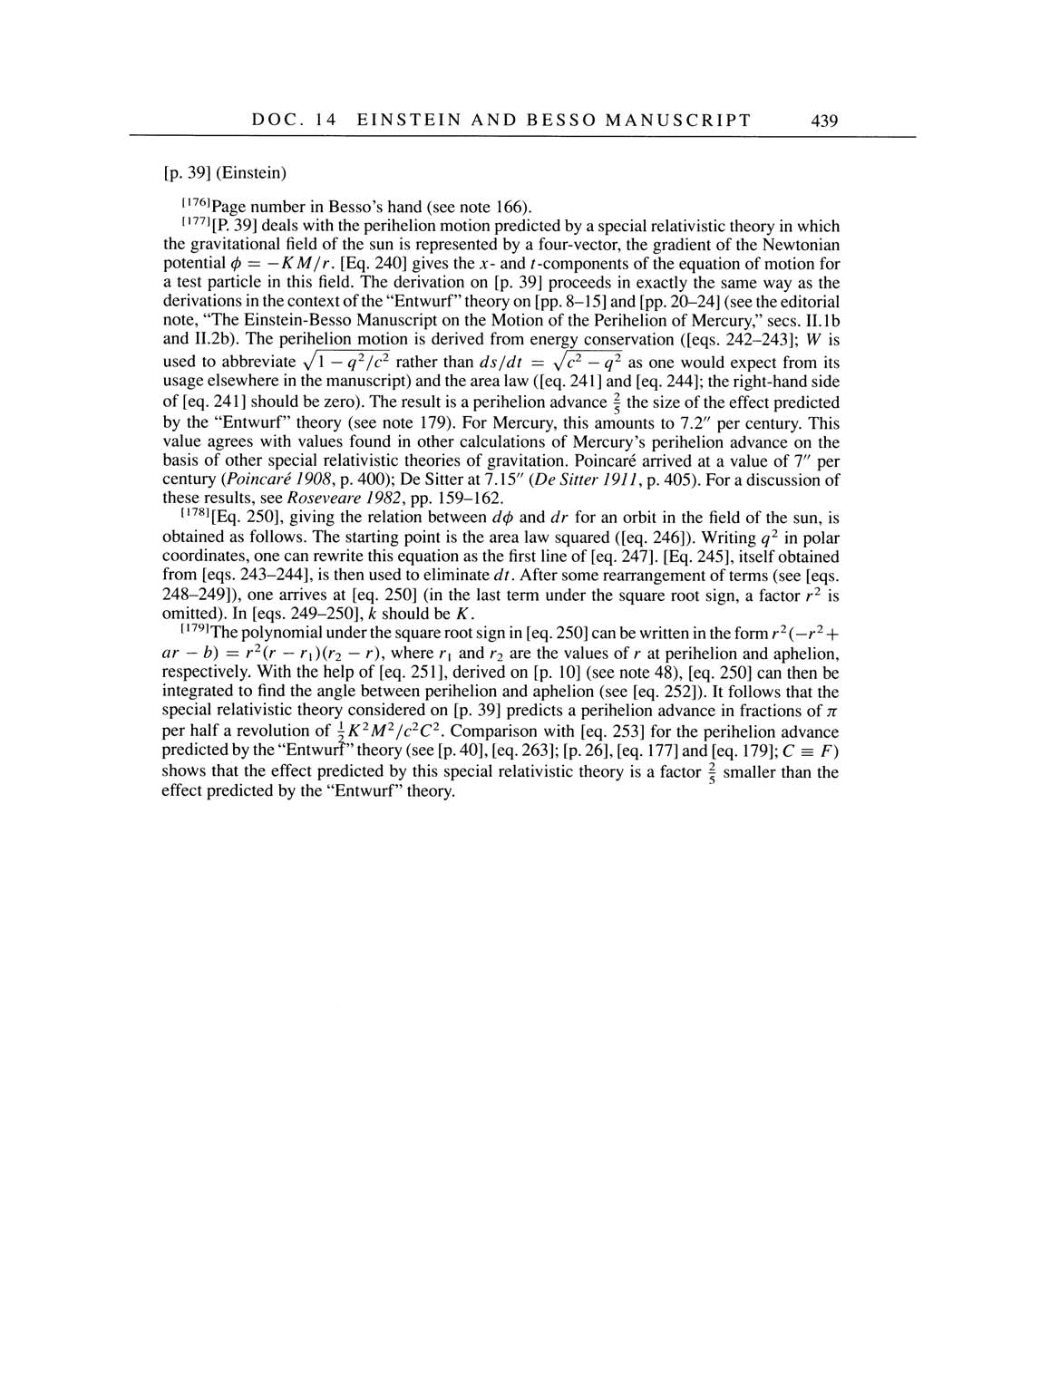 Volume 4: The Swiss Years: Writings 1912-1914 page 439